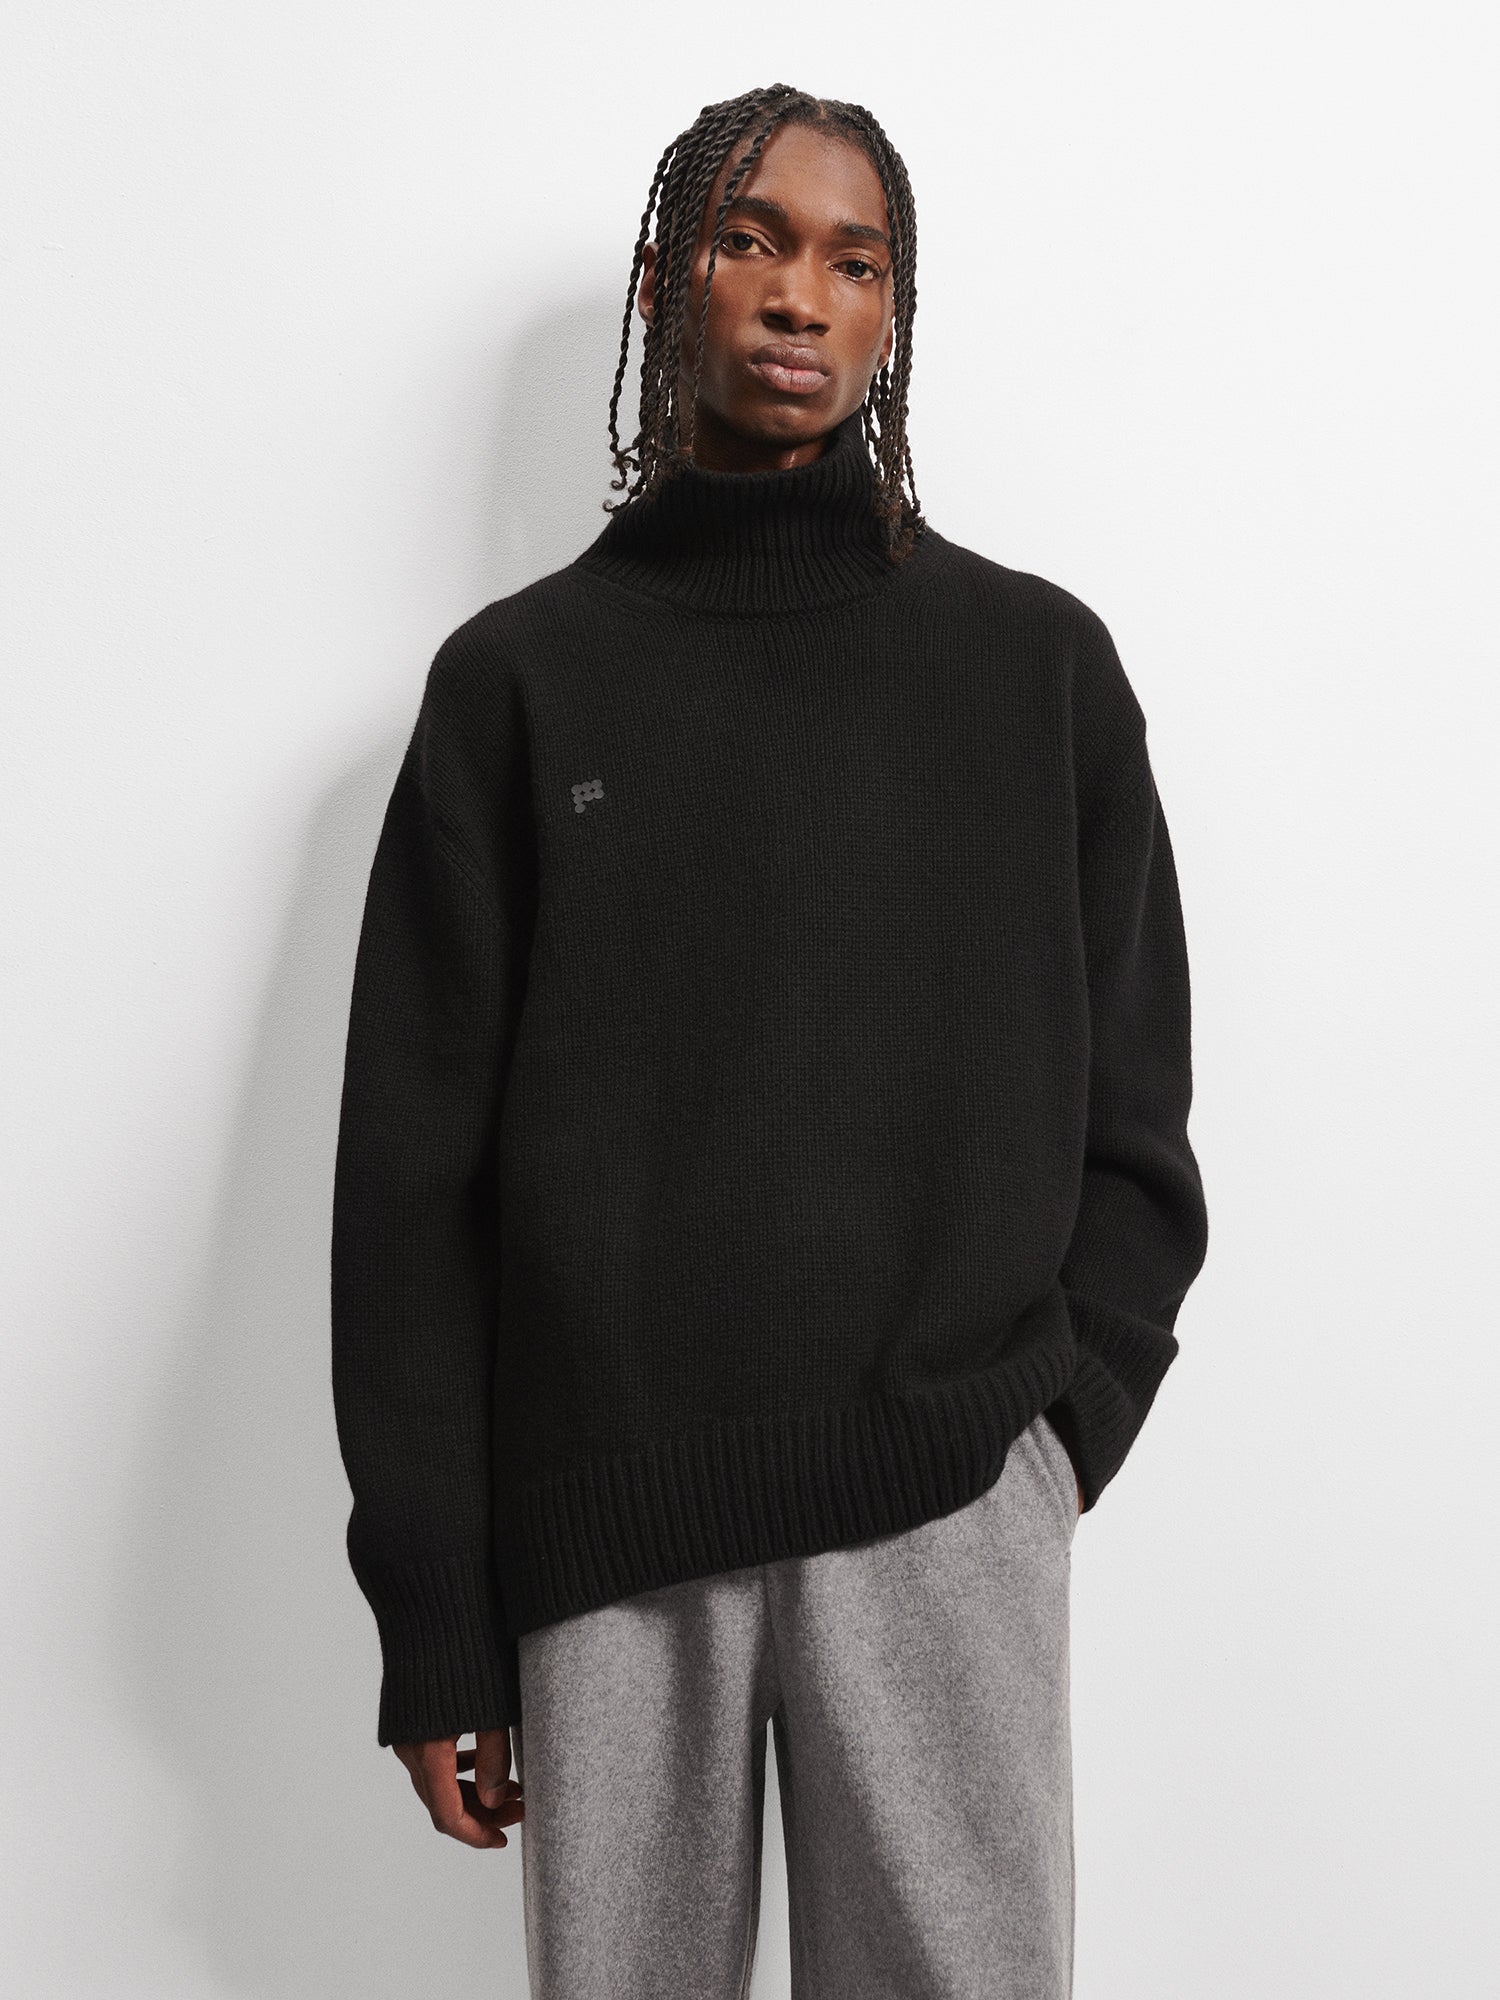 Men's Recycled Cashmere Turtleneck Sweater—black